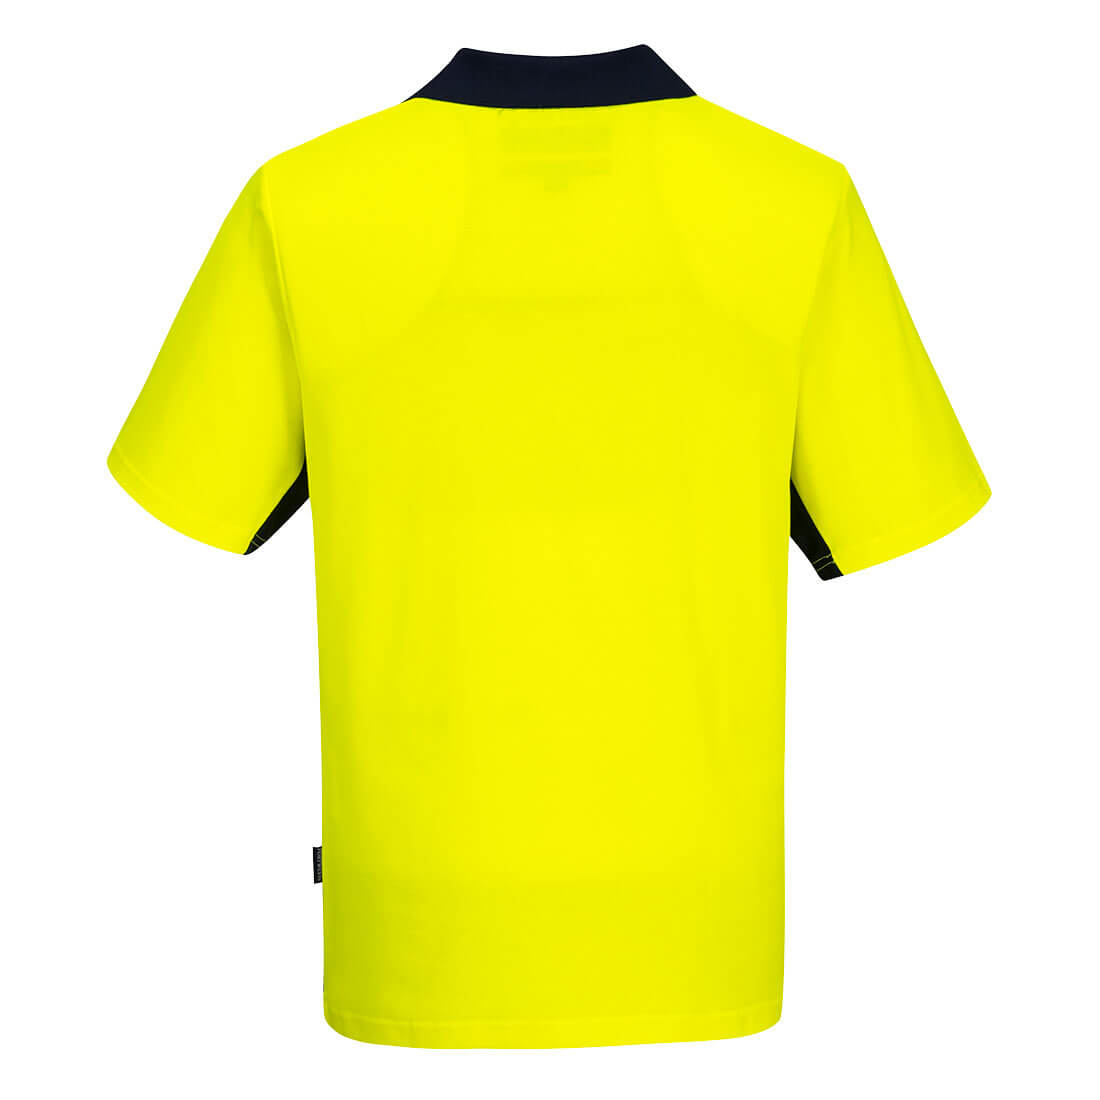 Food Polo Cotton S/S Class D Yellow/Navy - Back - MF210